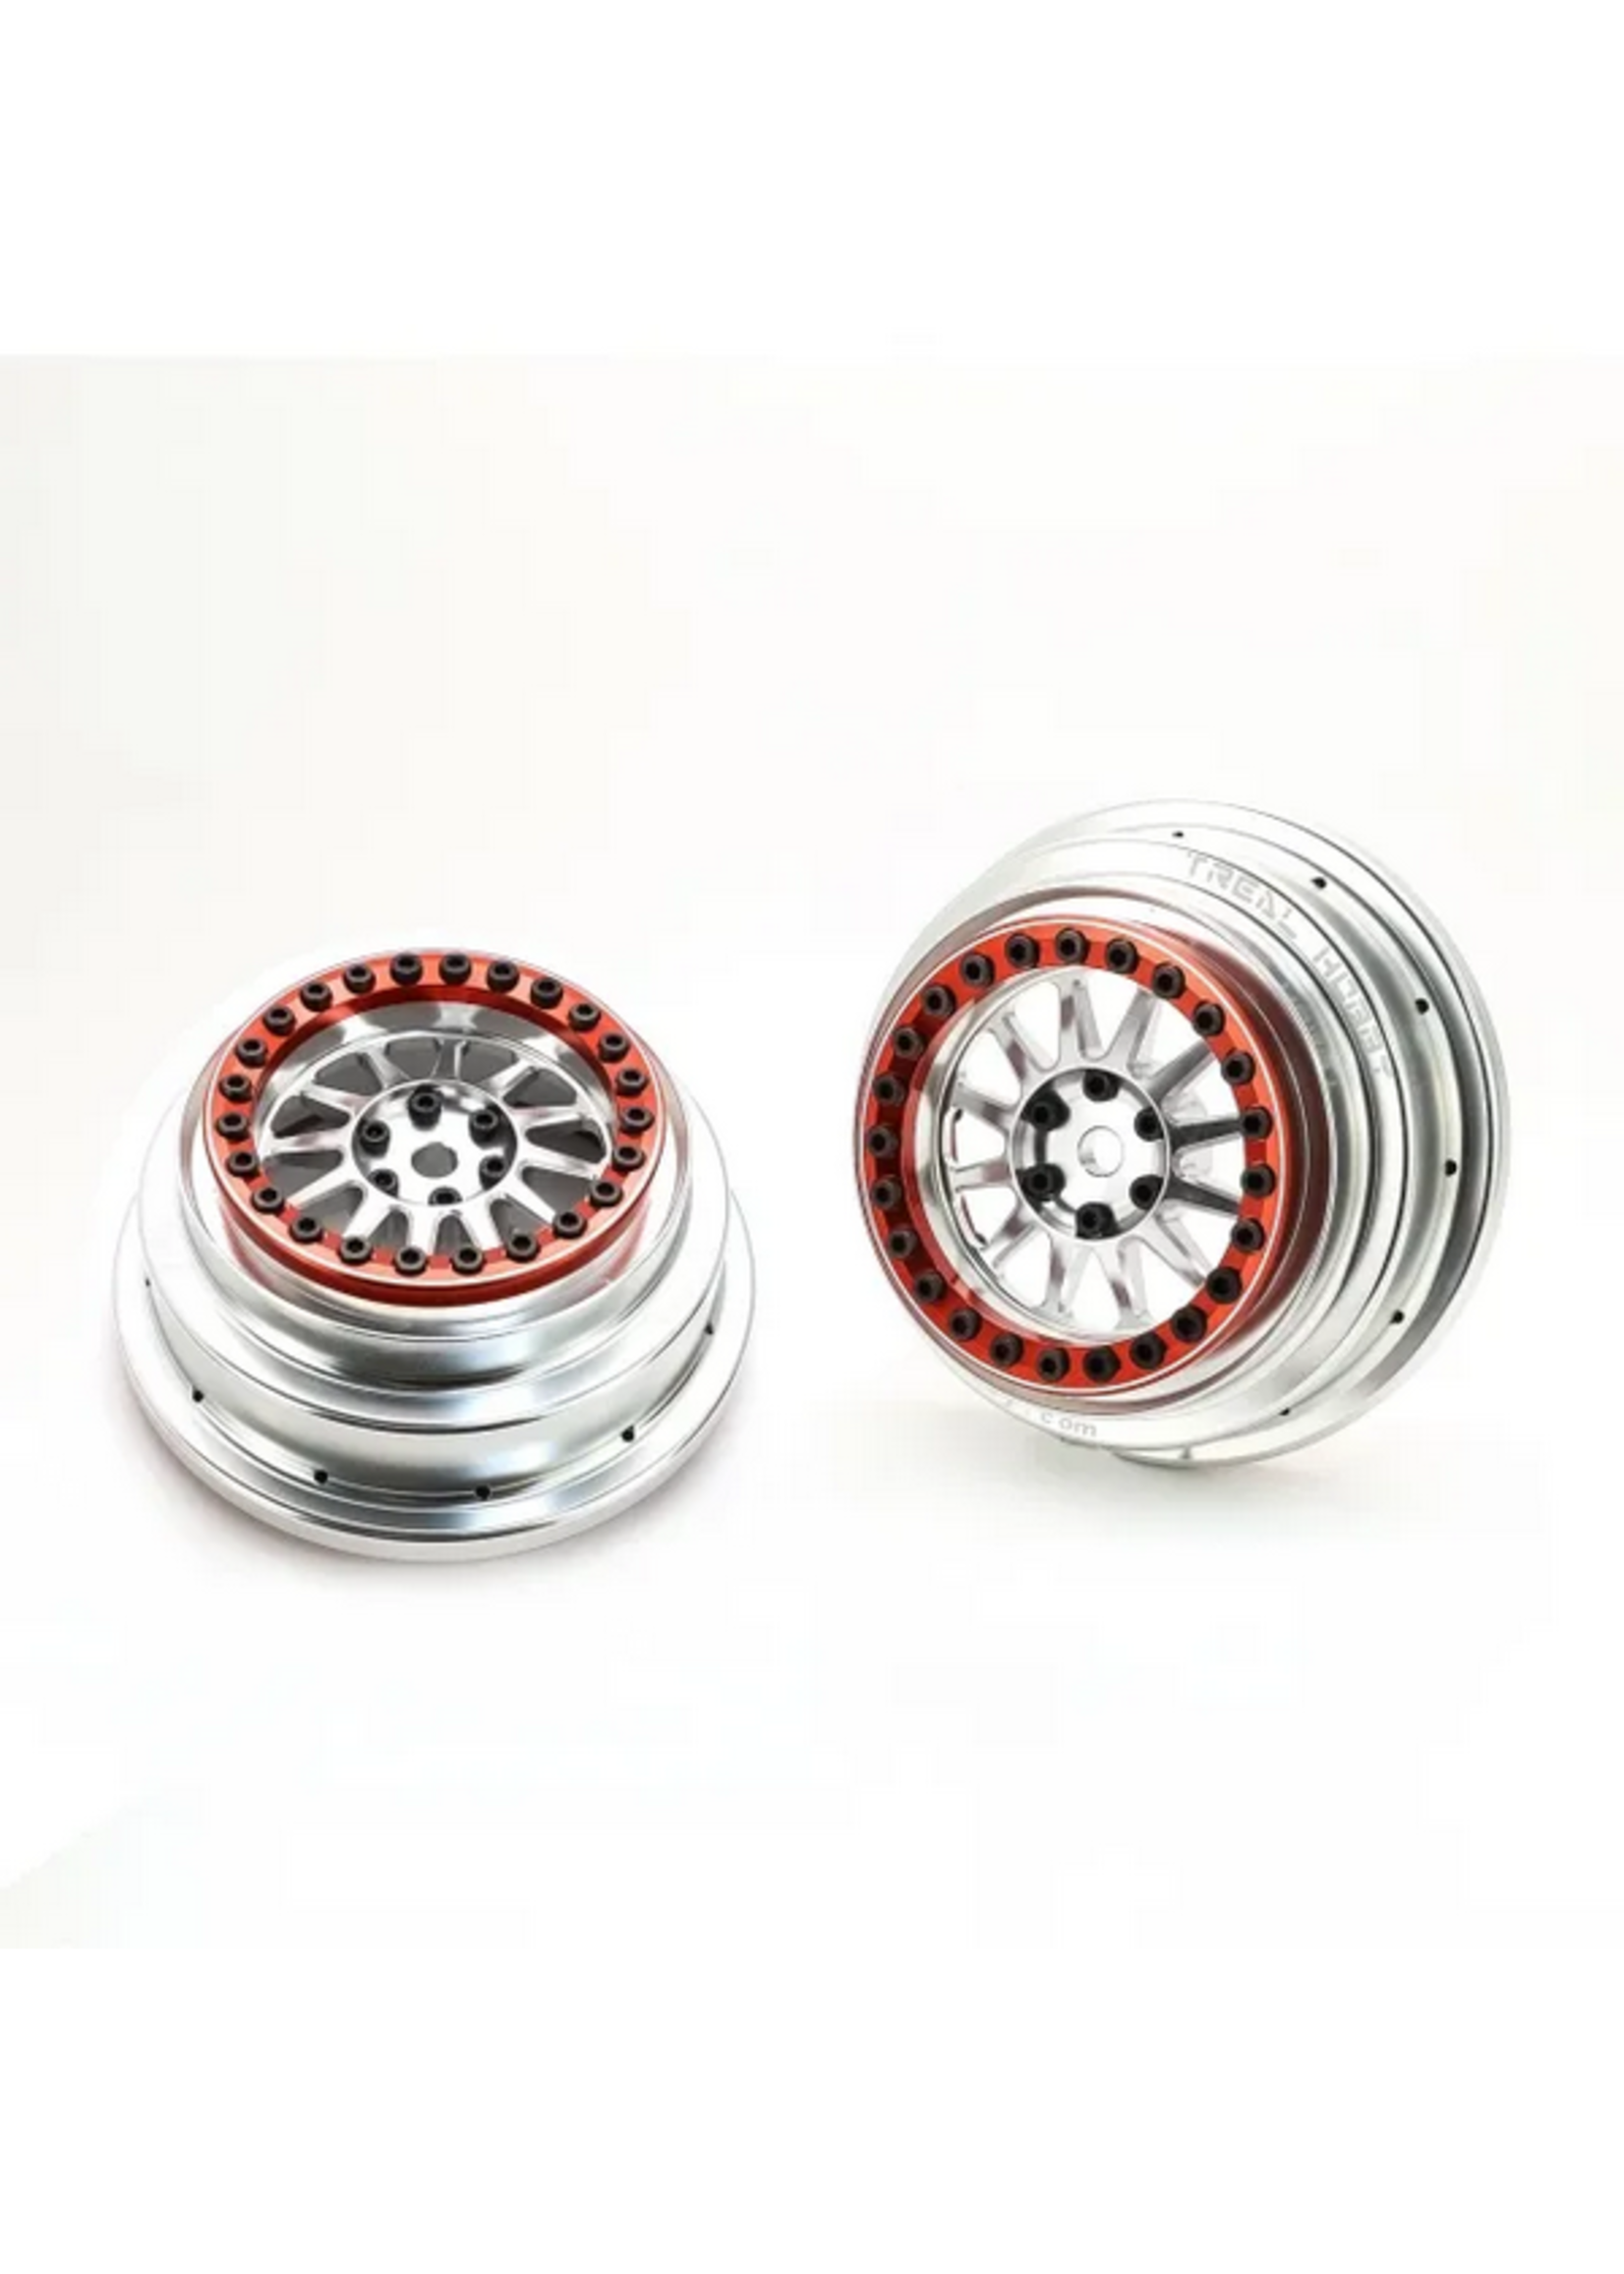 Treal Treal Aluminium Beadlock Wheels 1:7 RC Wheel Hubs Rims for UDR Compatible with Stock Factory Tires-V1 Silver/Red